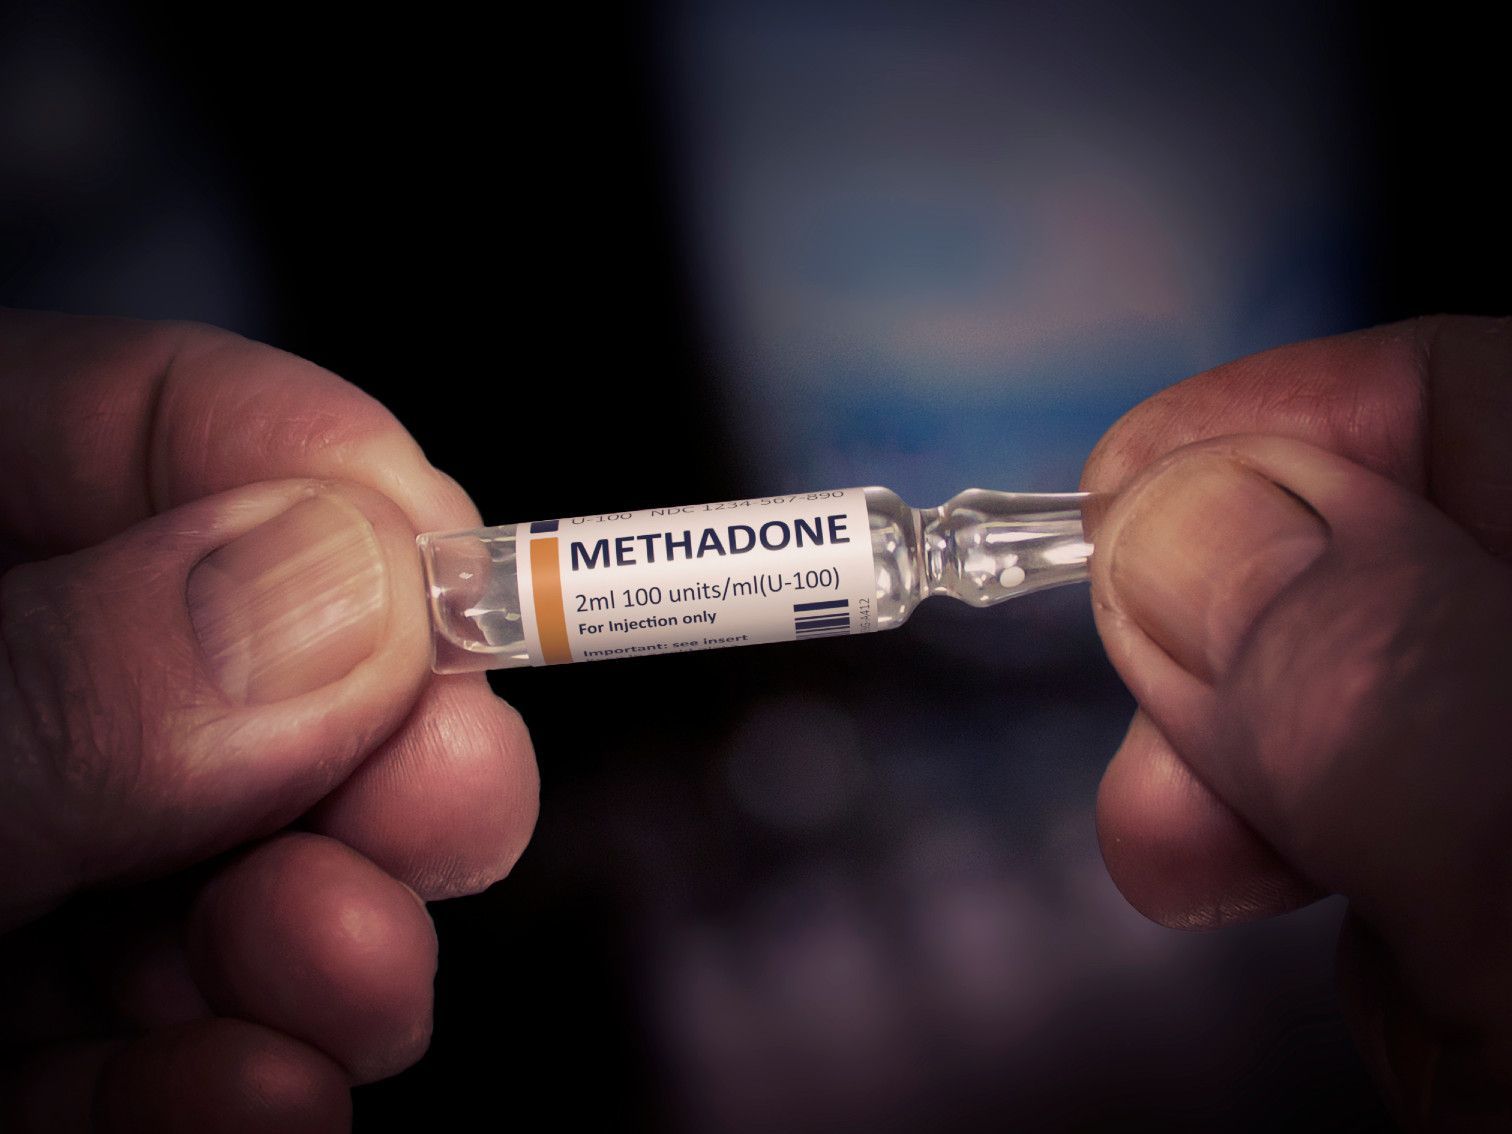 Image for representation. When the dose is high enough, methadone blocks the brain’s natural opioid receptors. /